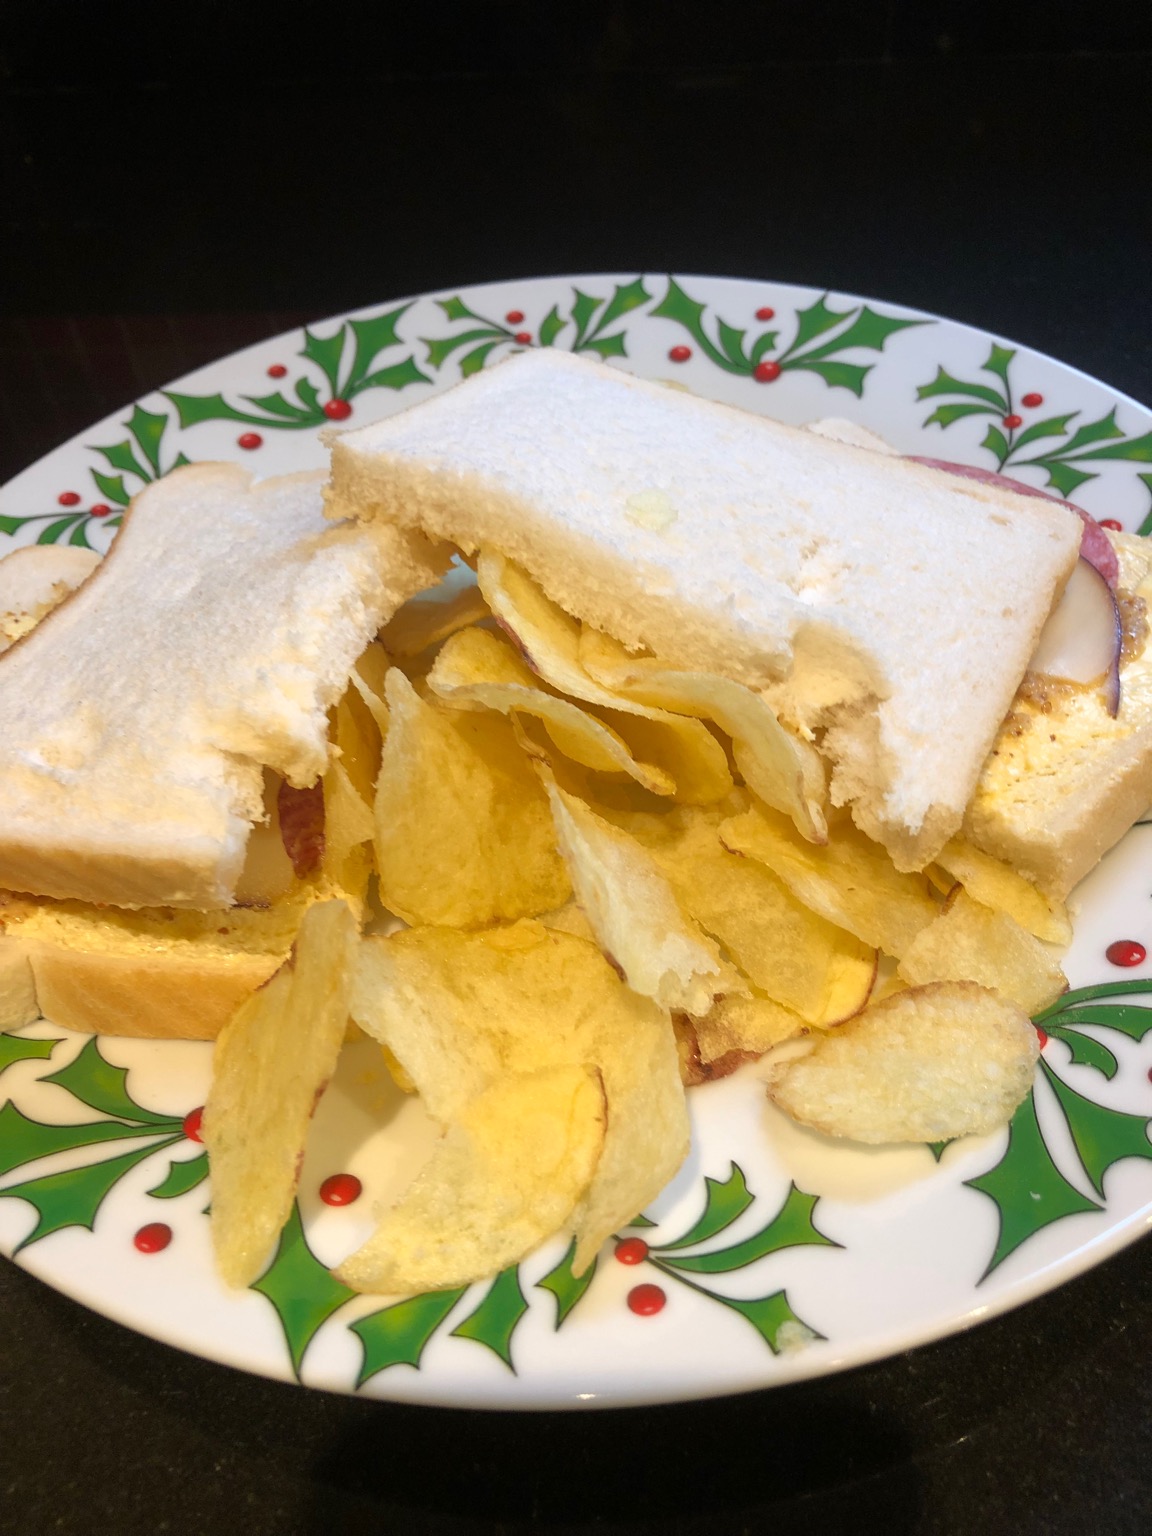 Crisps within and around white sliced bread